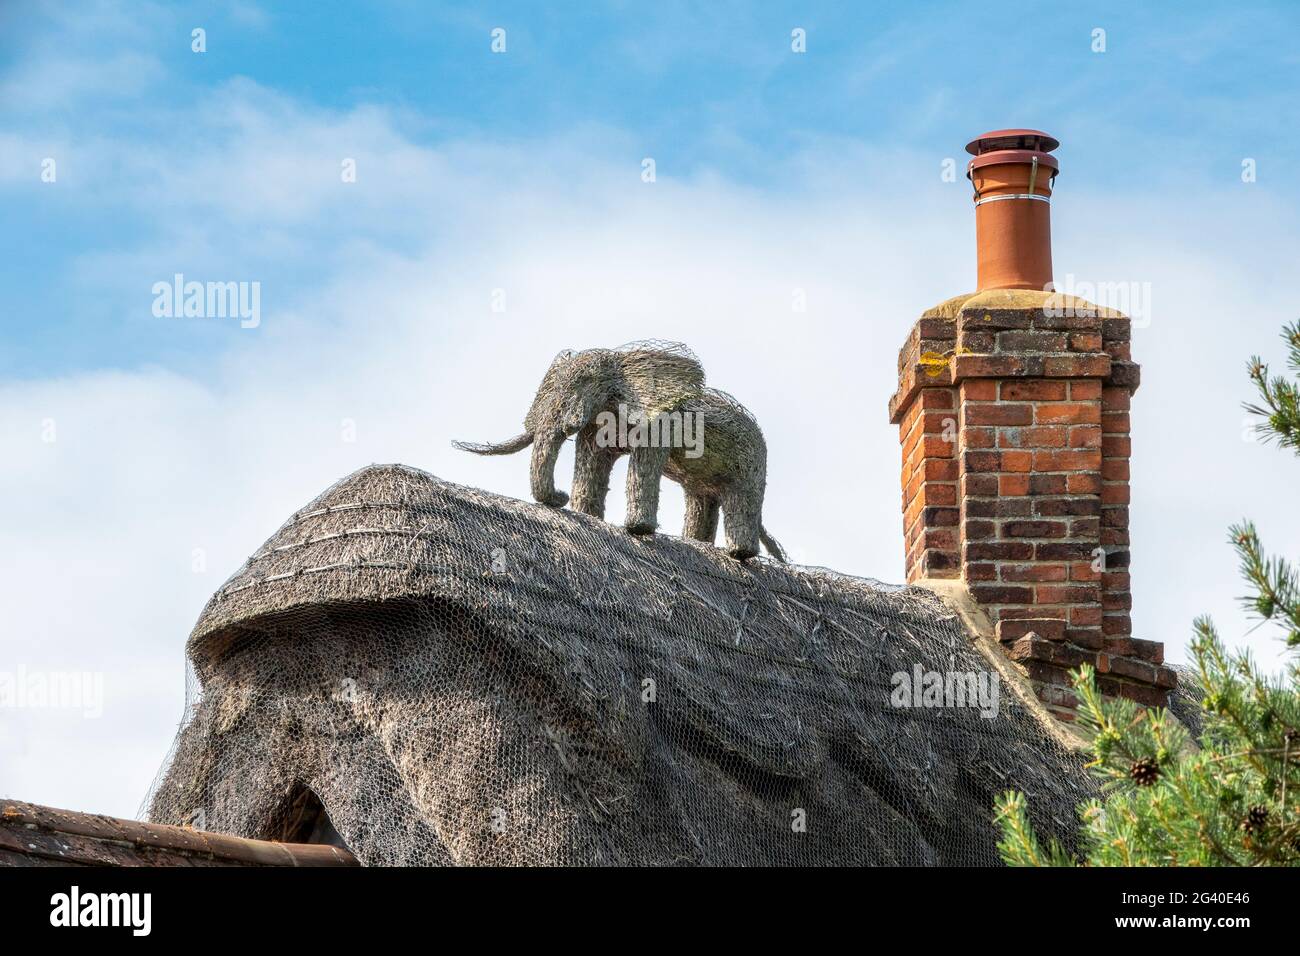 Straw elephant finial near a brick chimney on thatched roof in Cambridgeshire Stock Photo